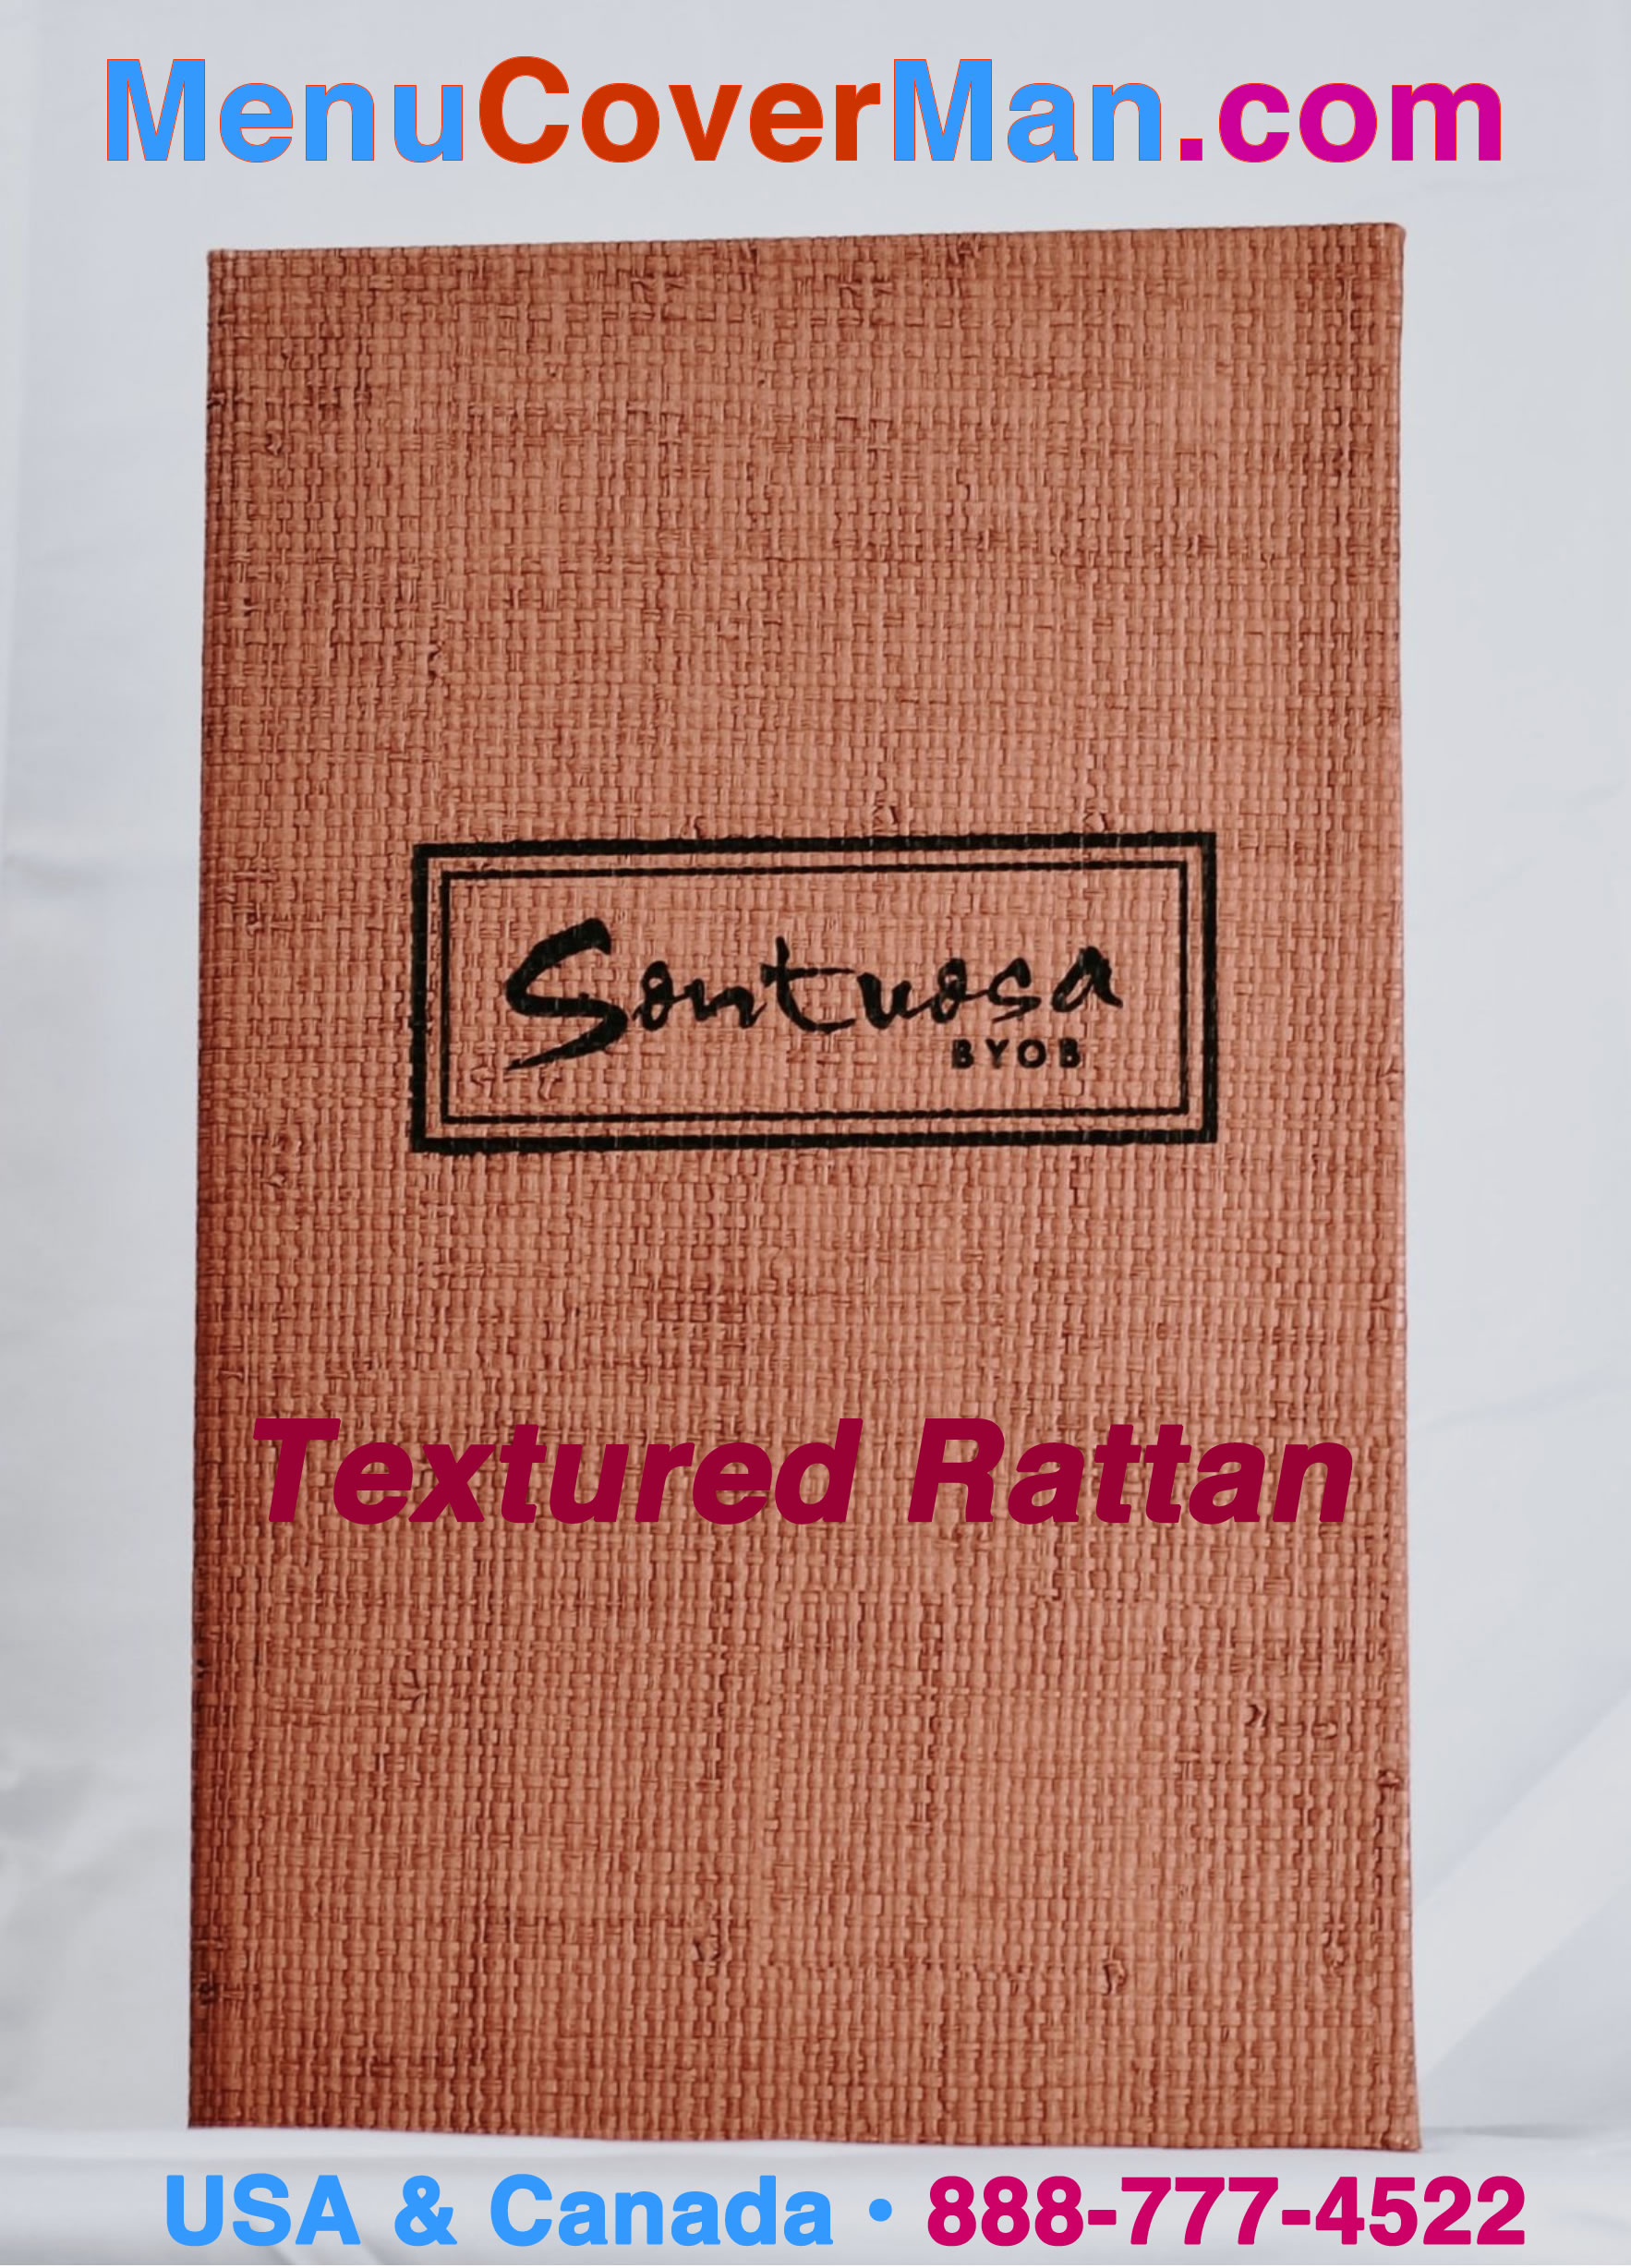 Textured Rattan Menu Covers for the finest restaurants.